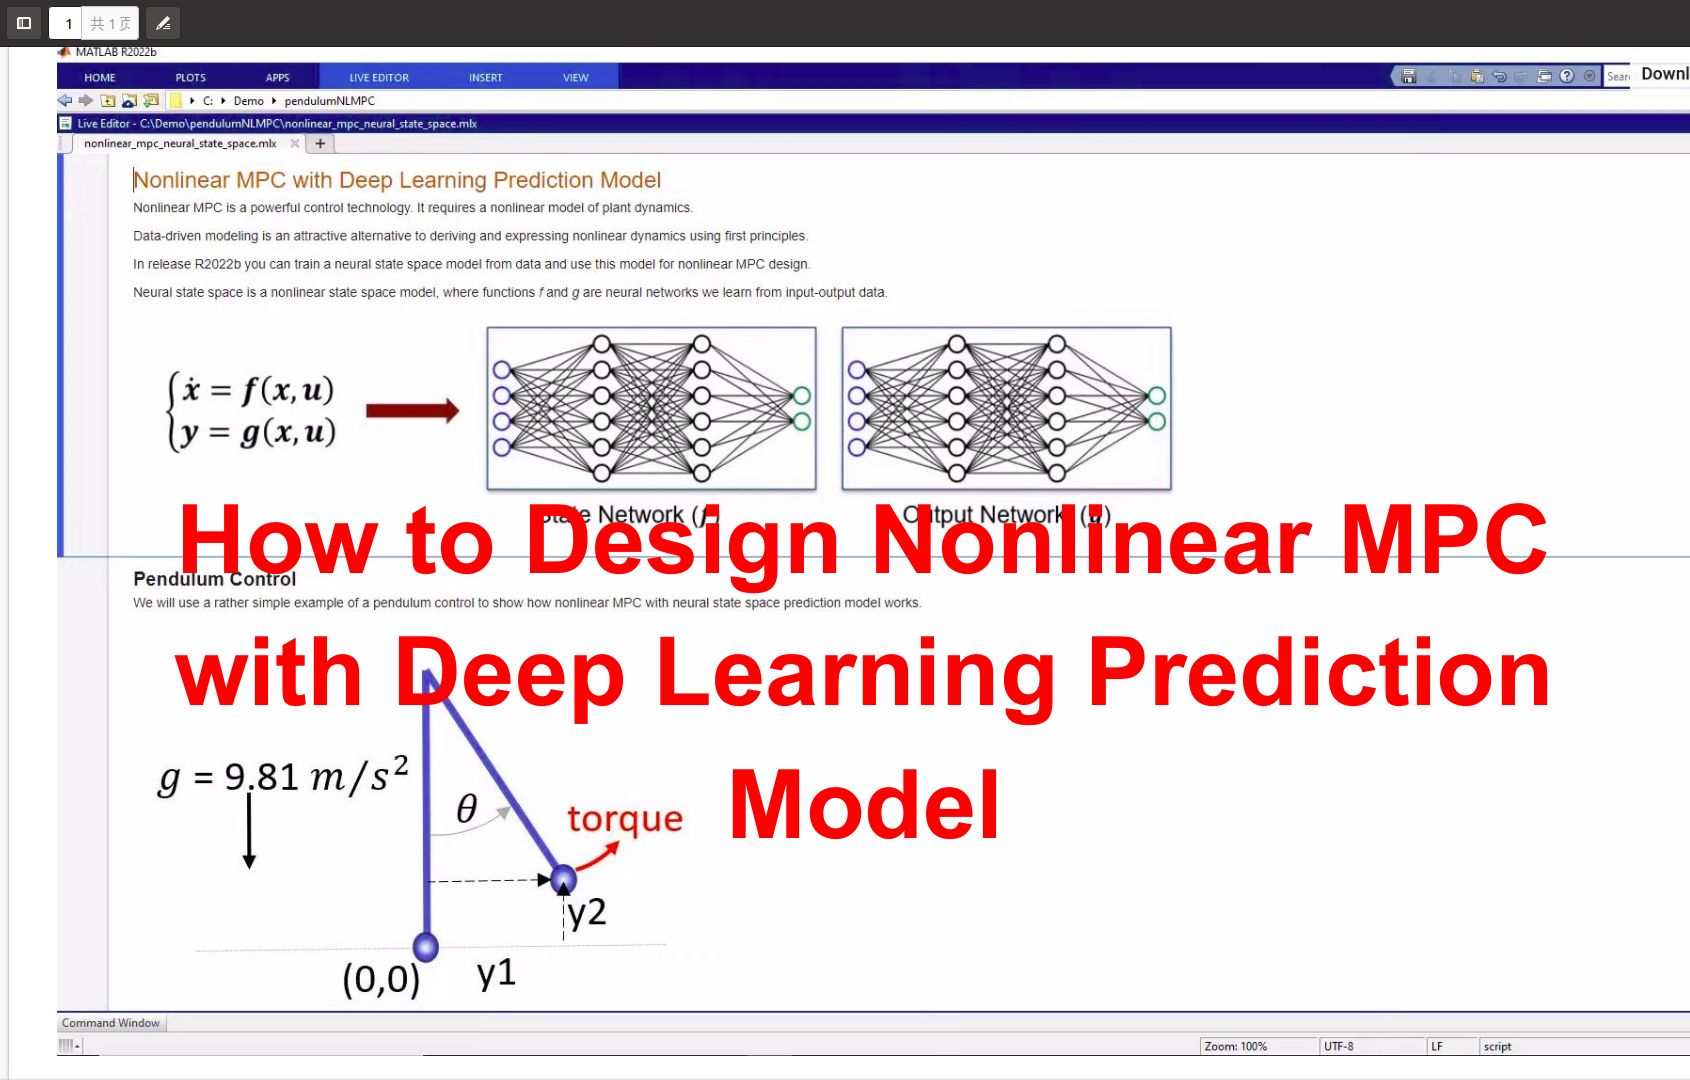 How to design nonlinear MPC with deep learning prediction model